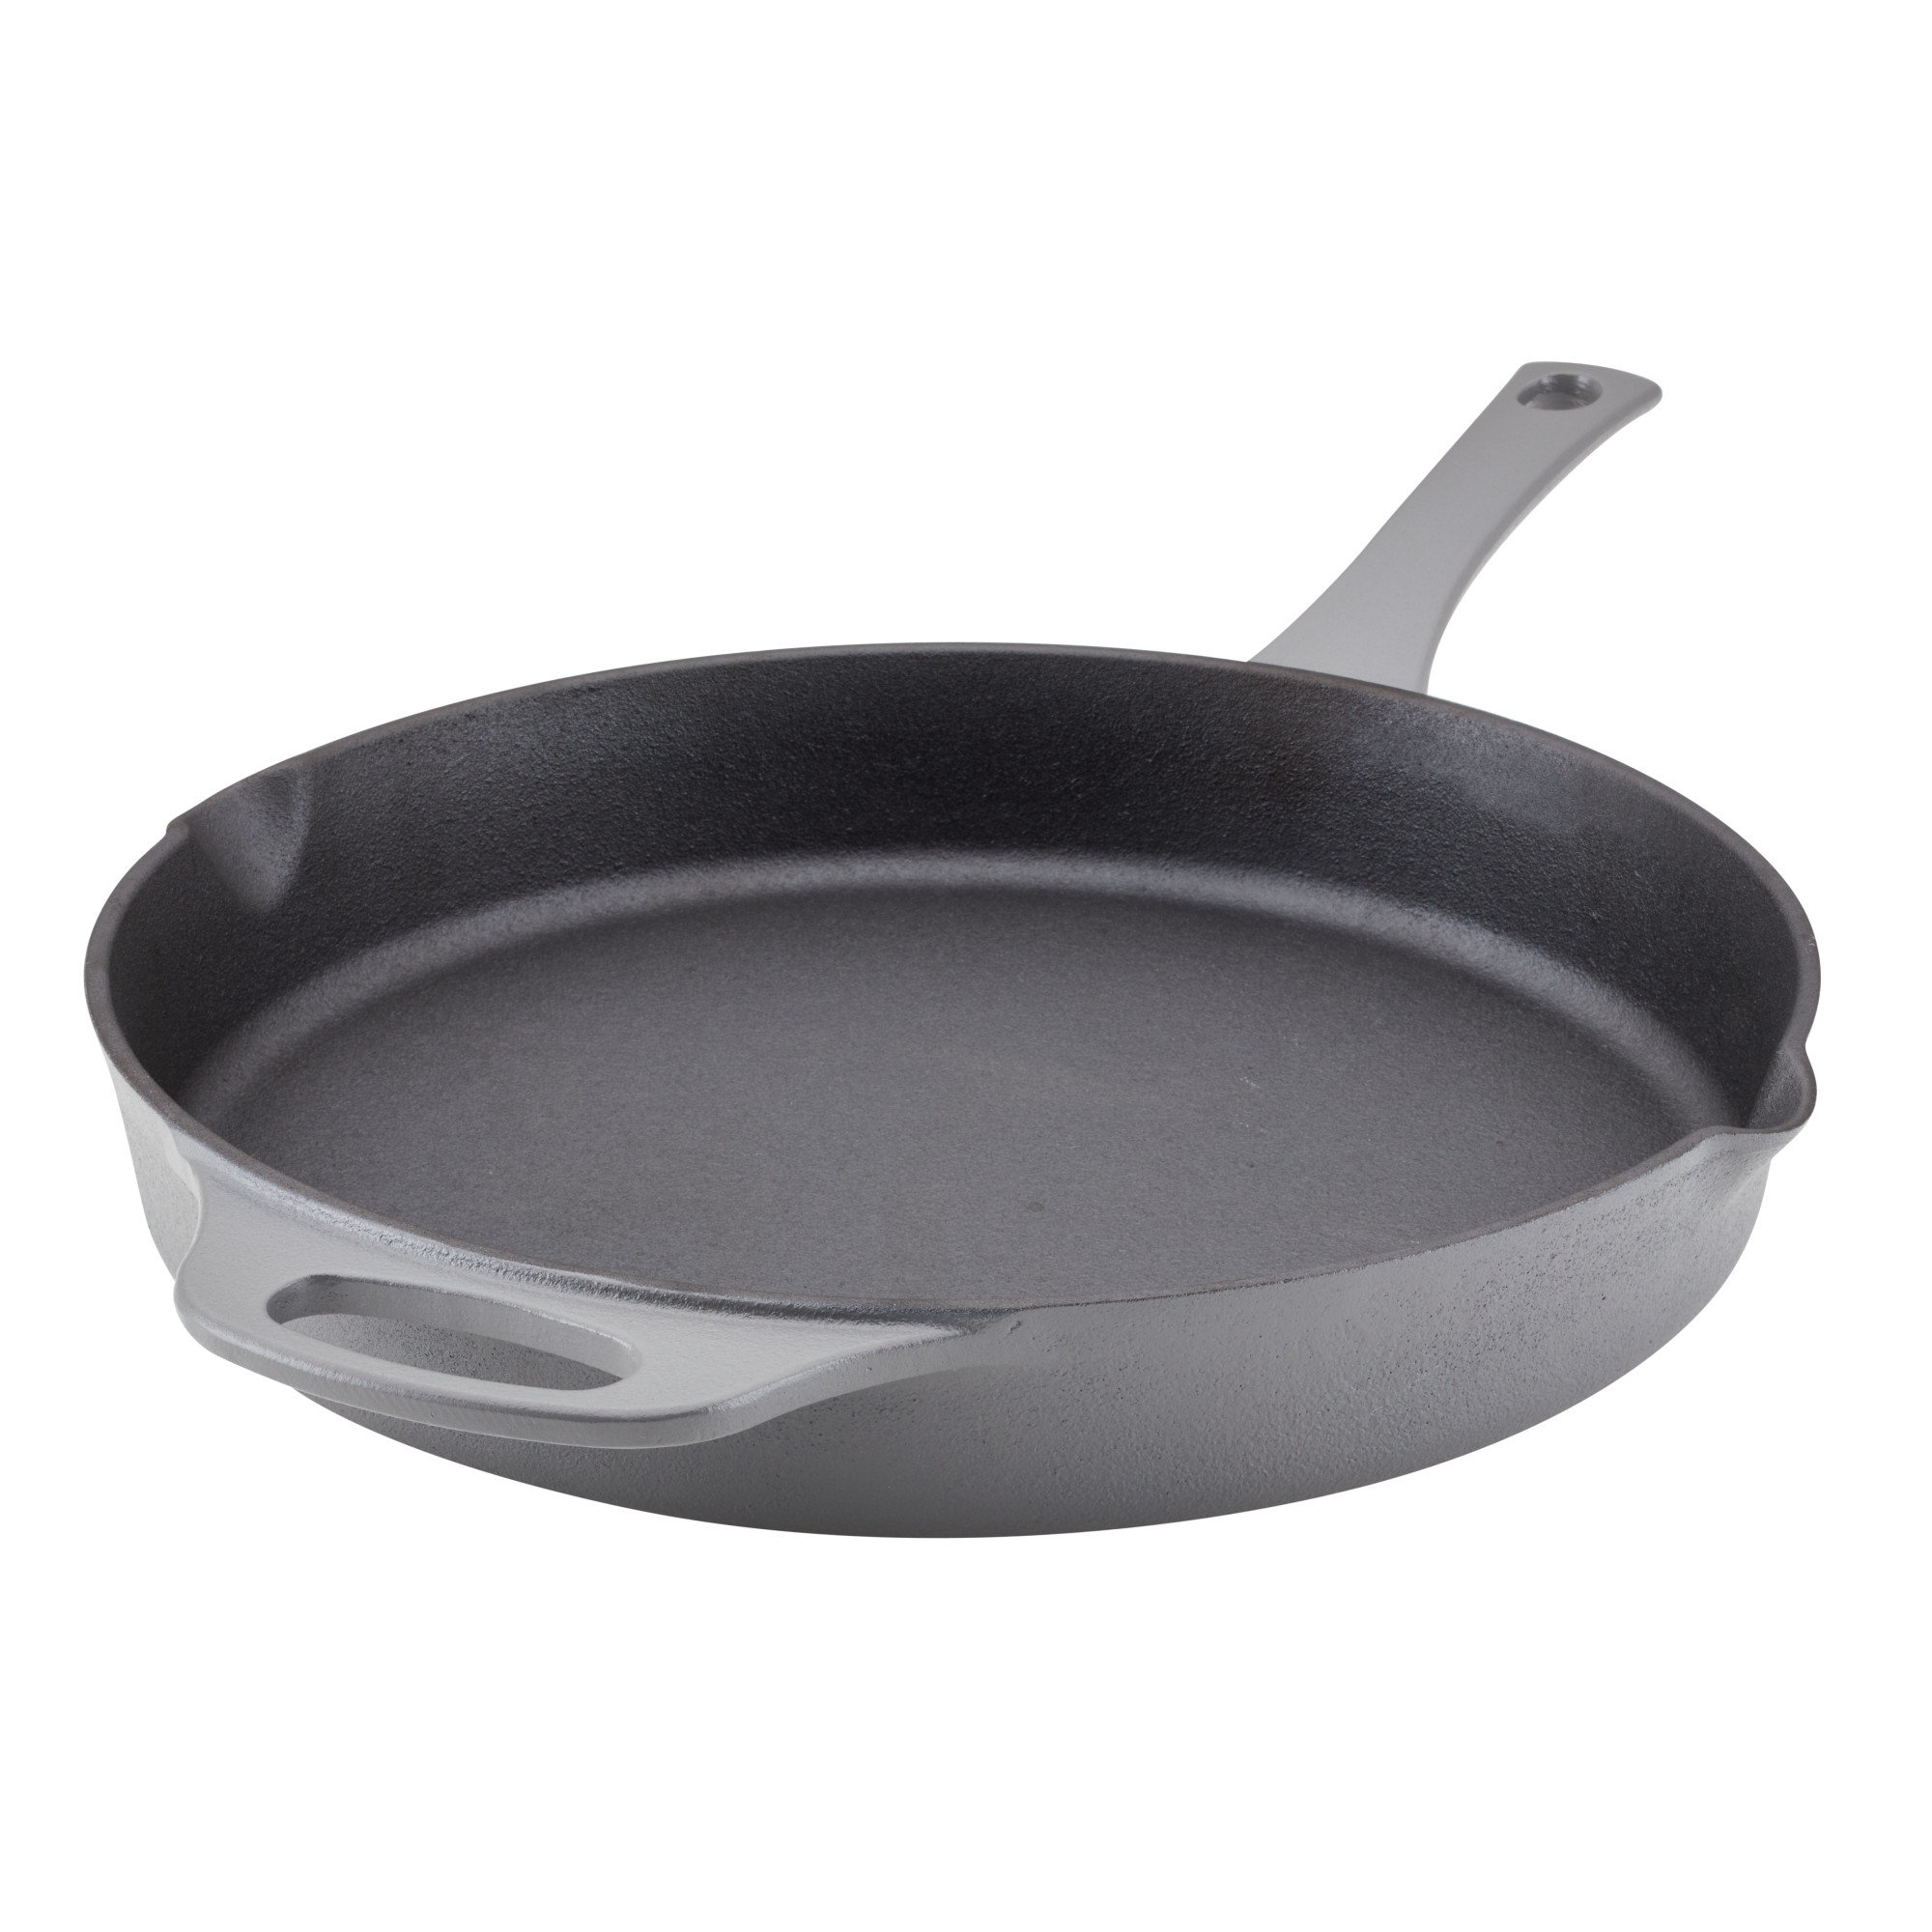 Lodge Chef Collection Skillet, Cast Iron, Chef Style, 12 Inch